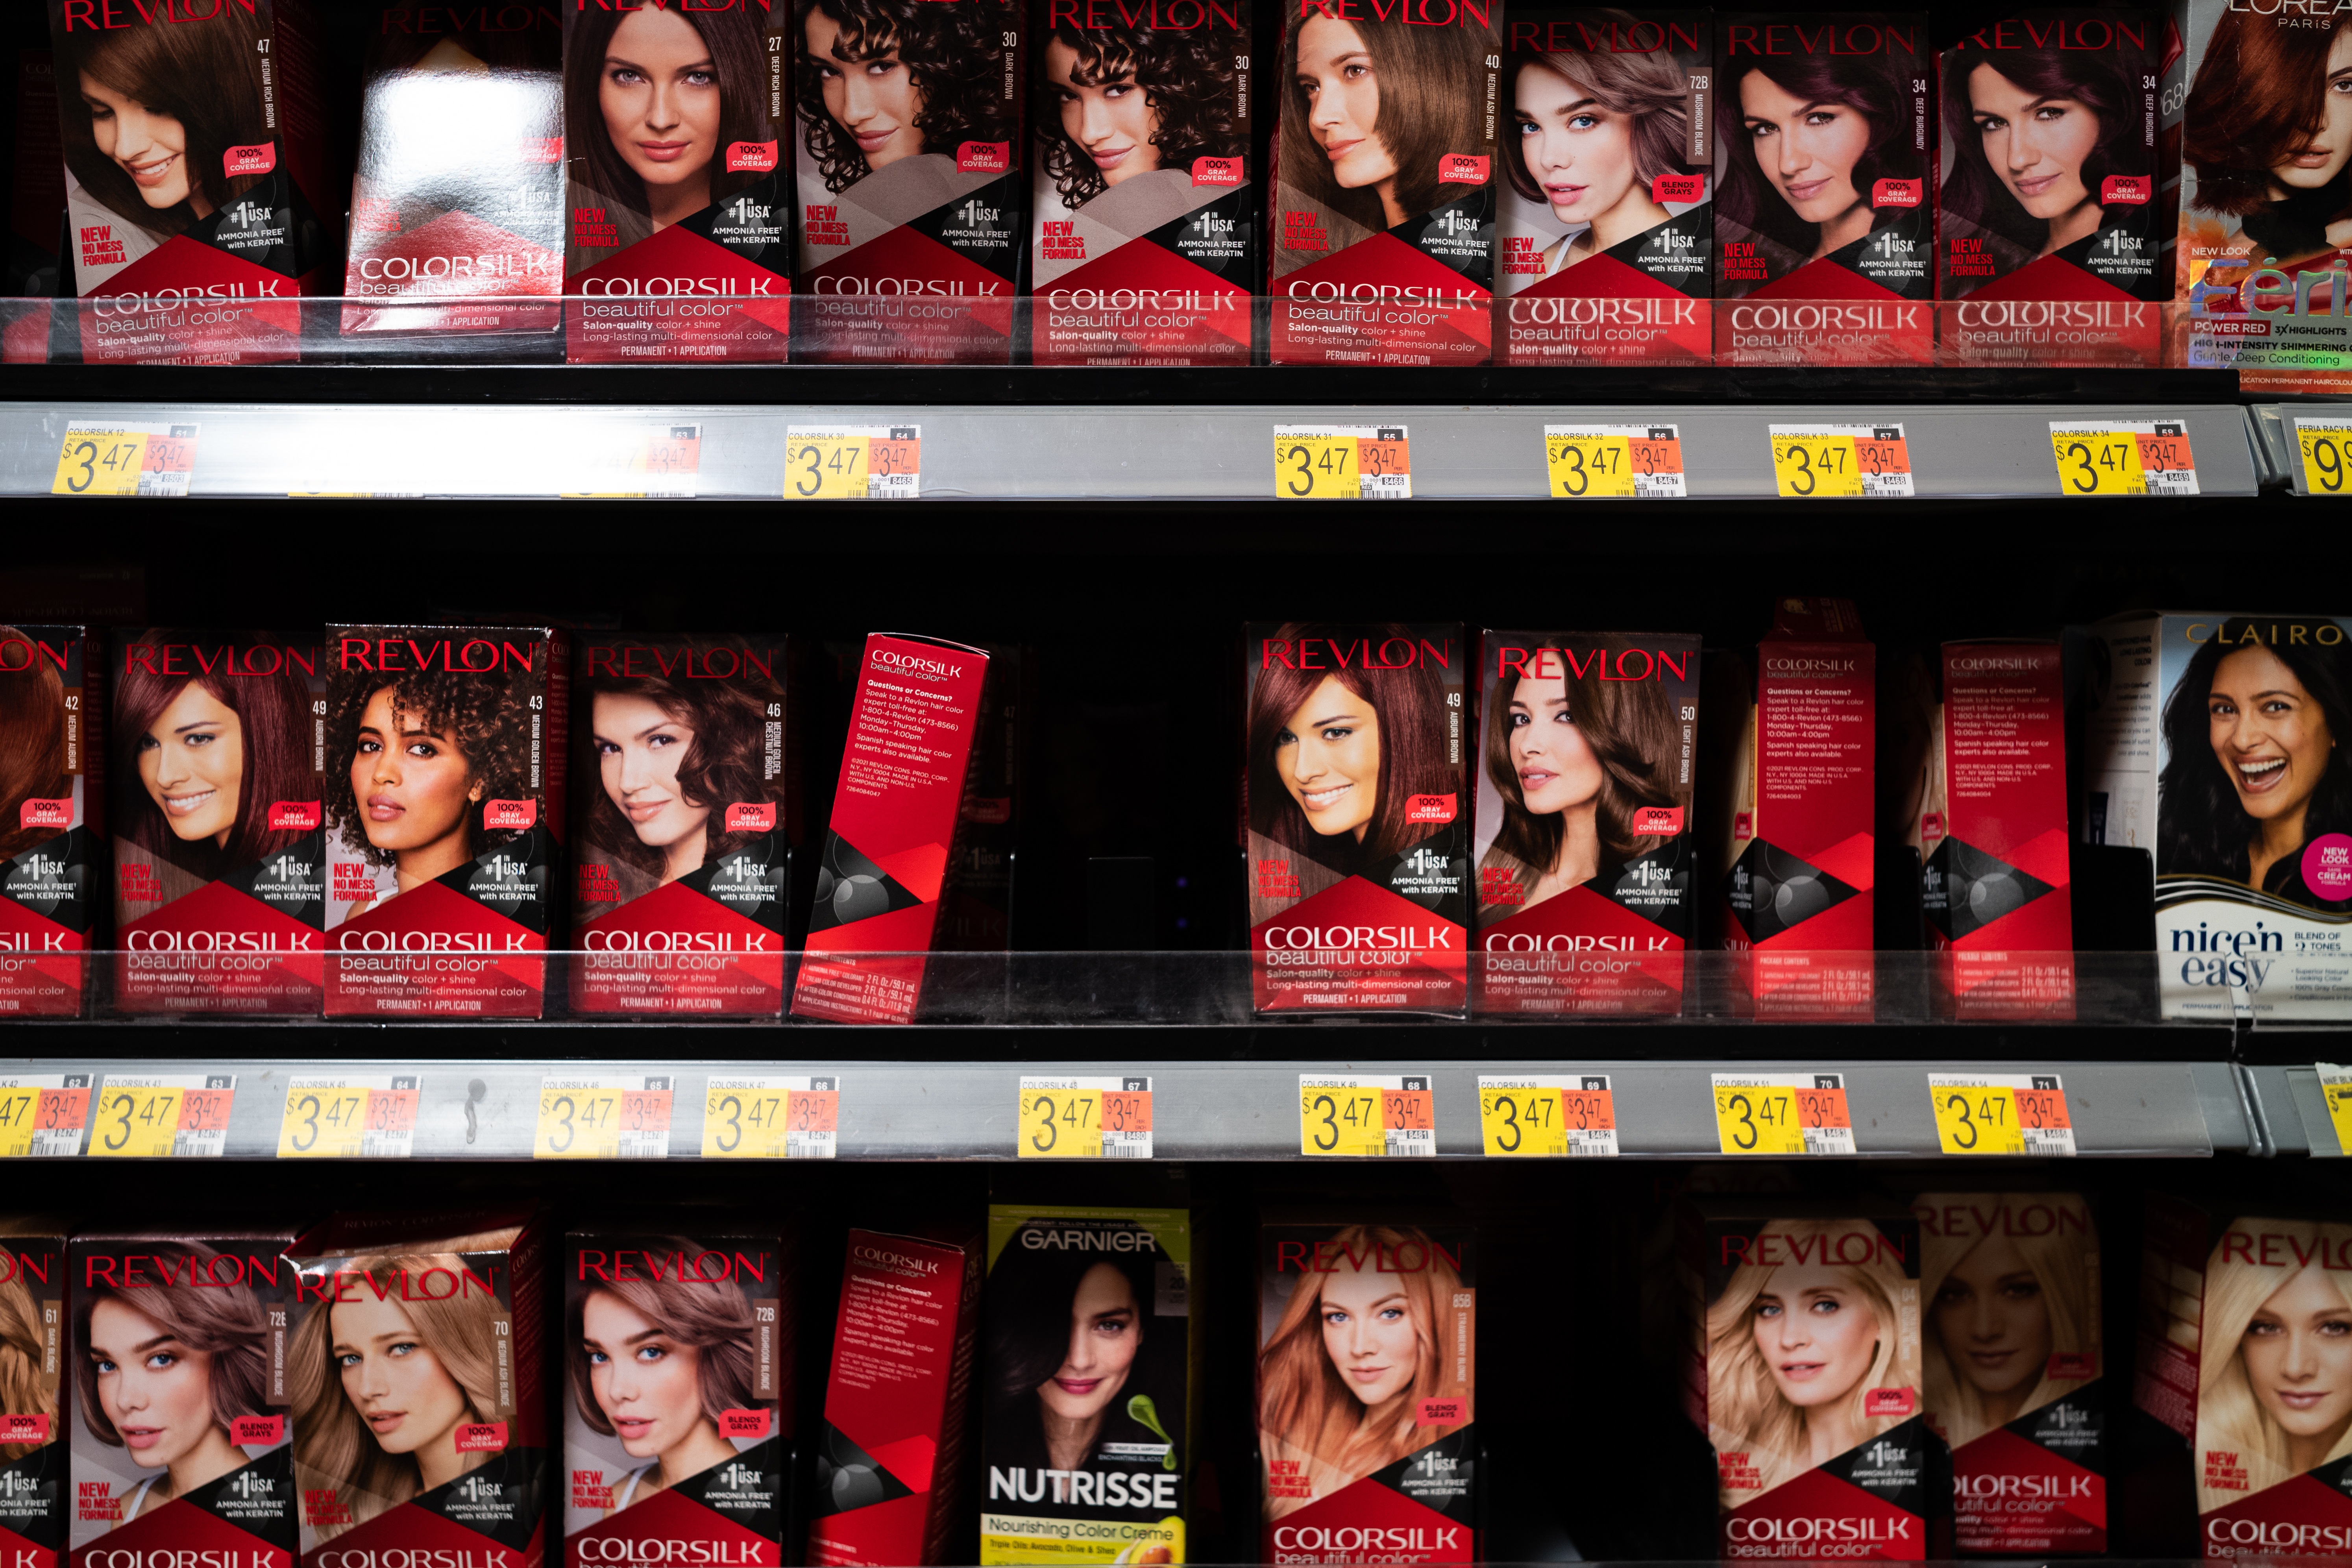 Revlon Files for Bankruptcy - The New York Times